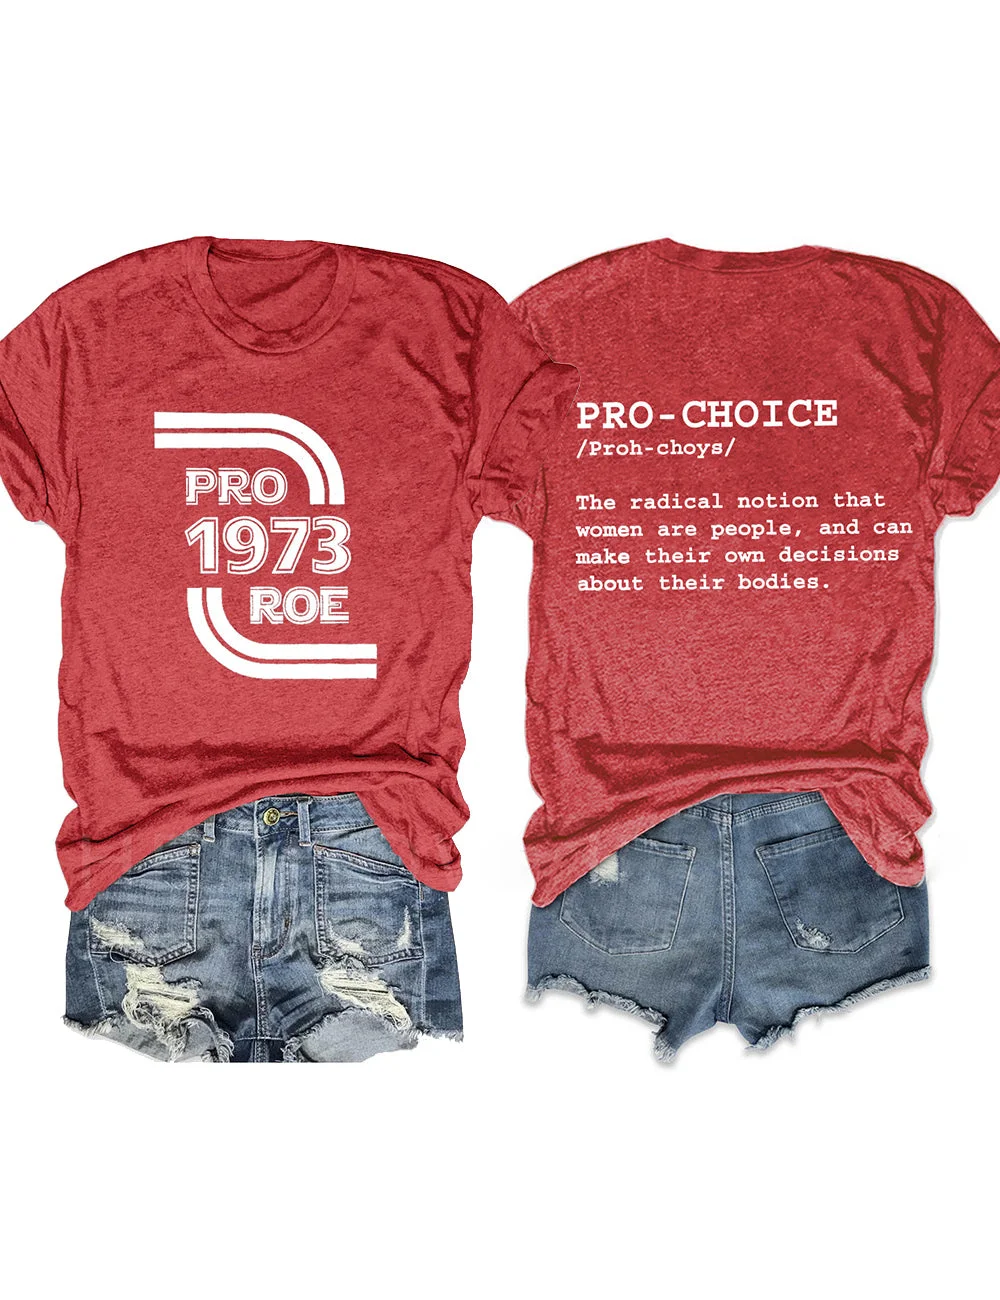 Pro Roe Pro-Choice Red Tee